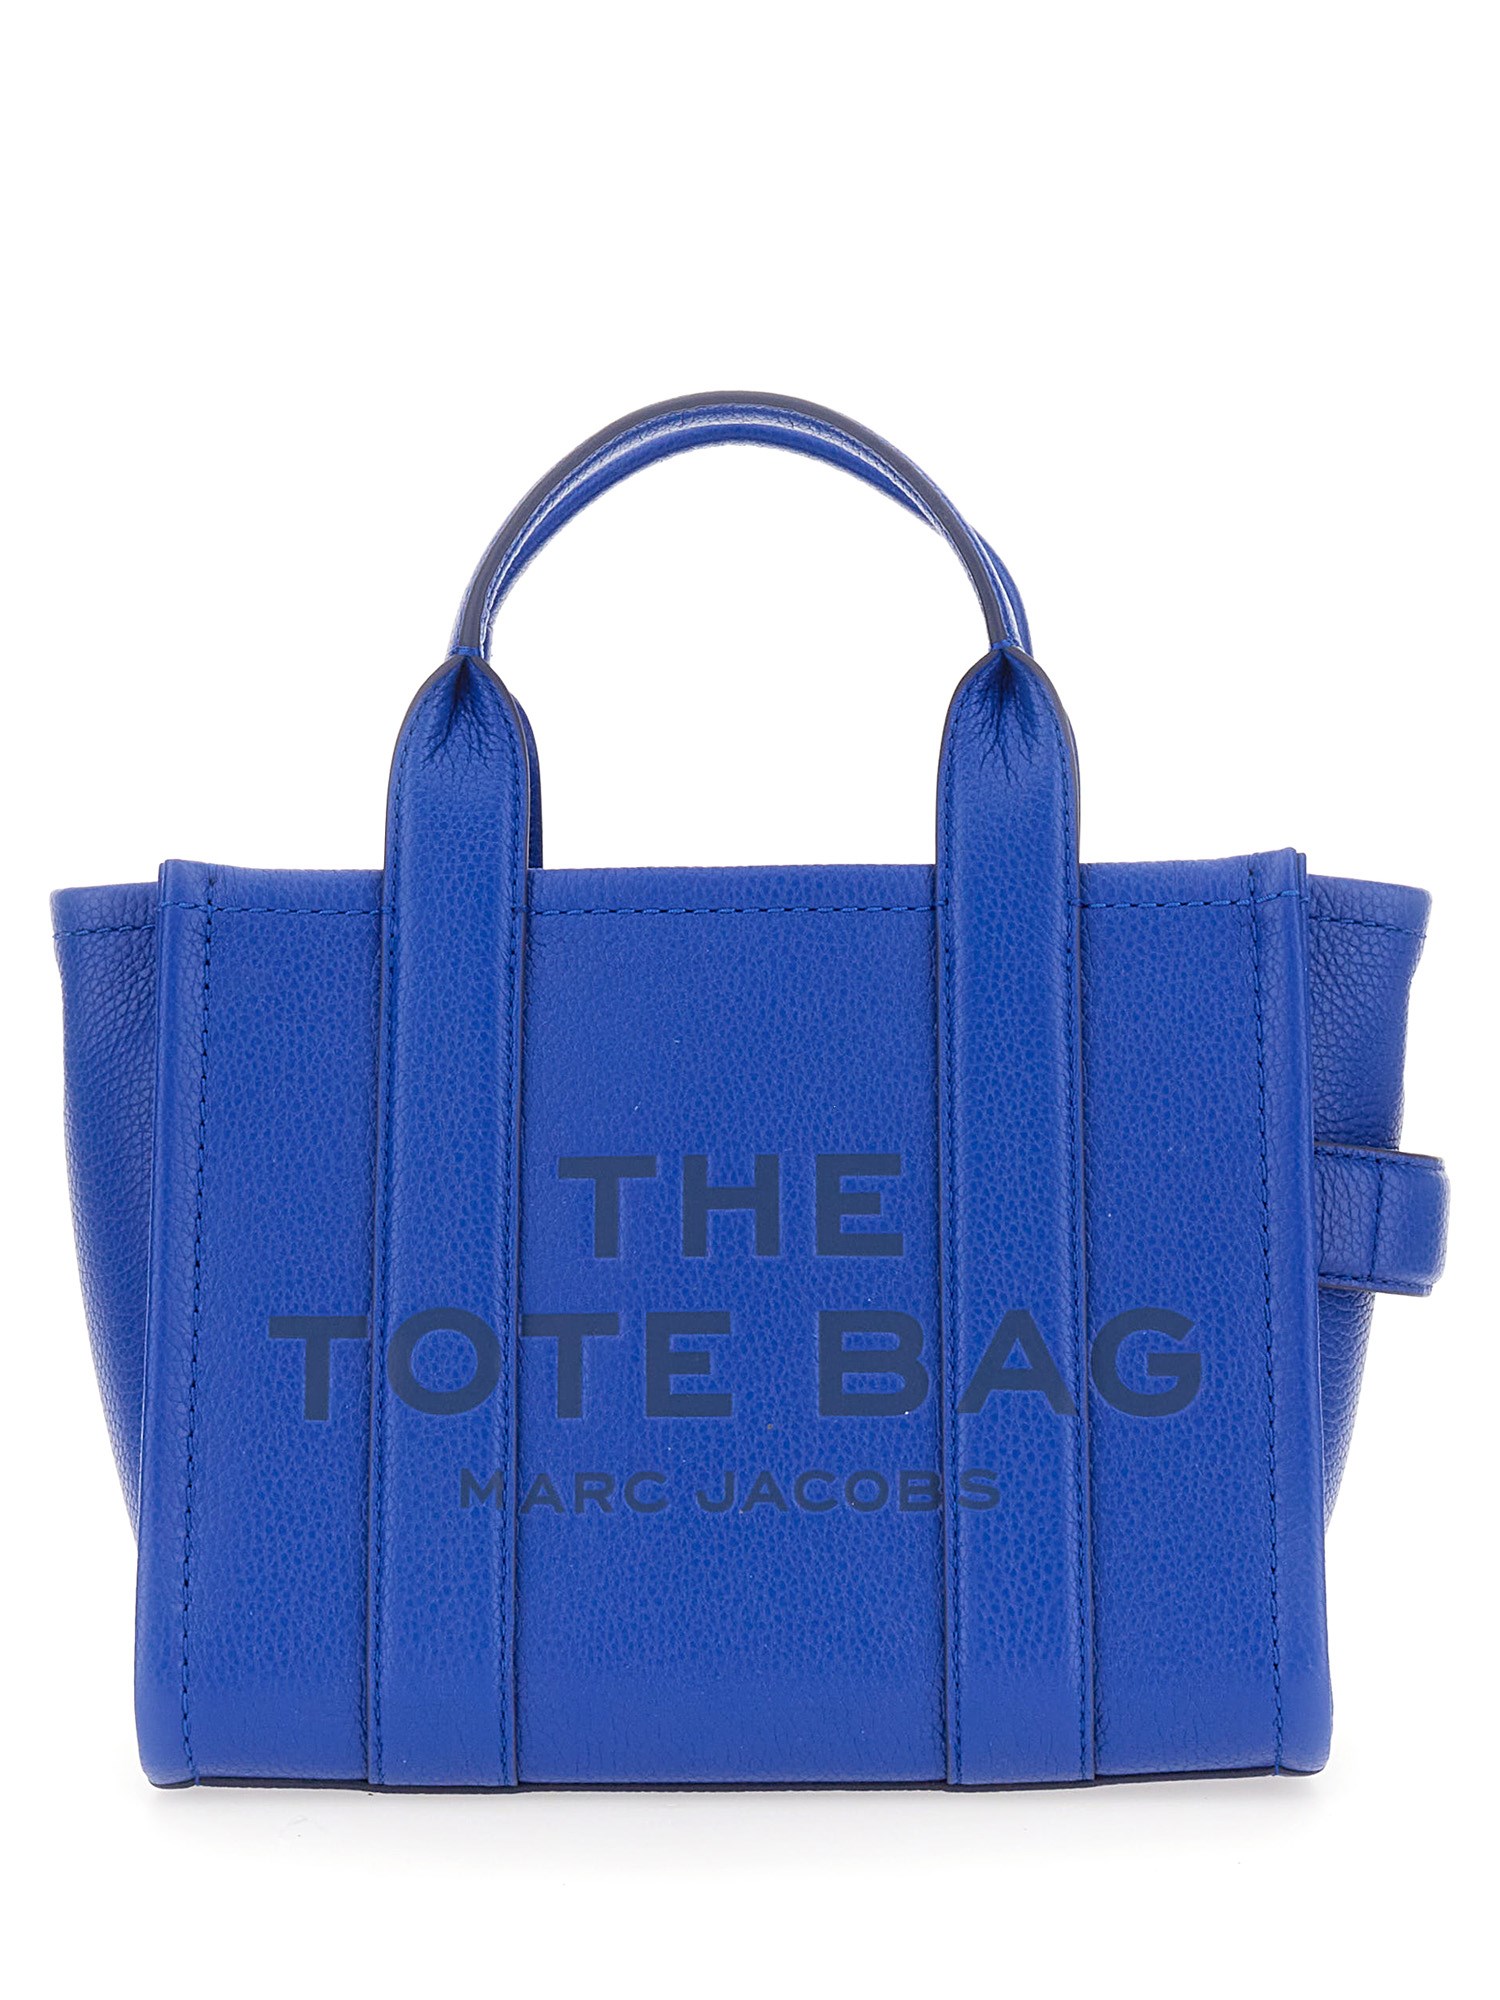 marc jacobs "the tote" bag small